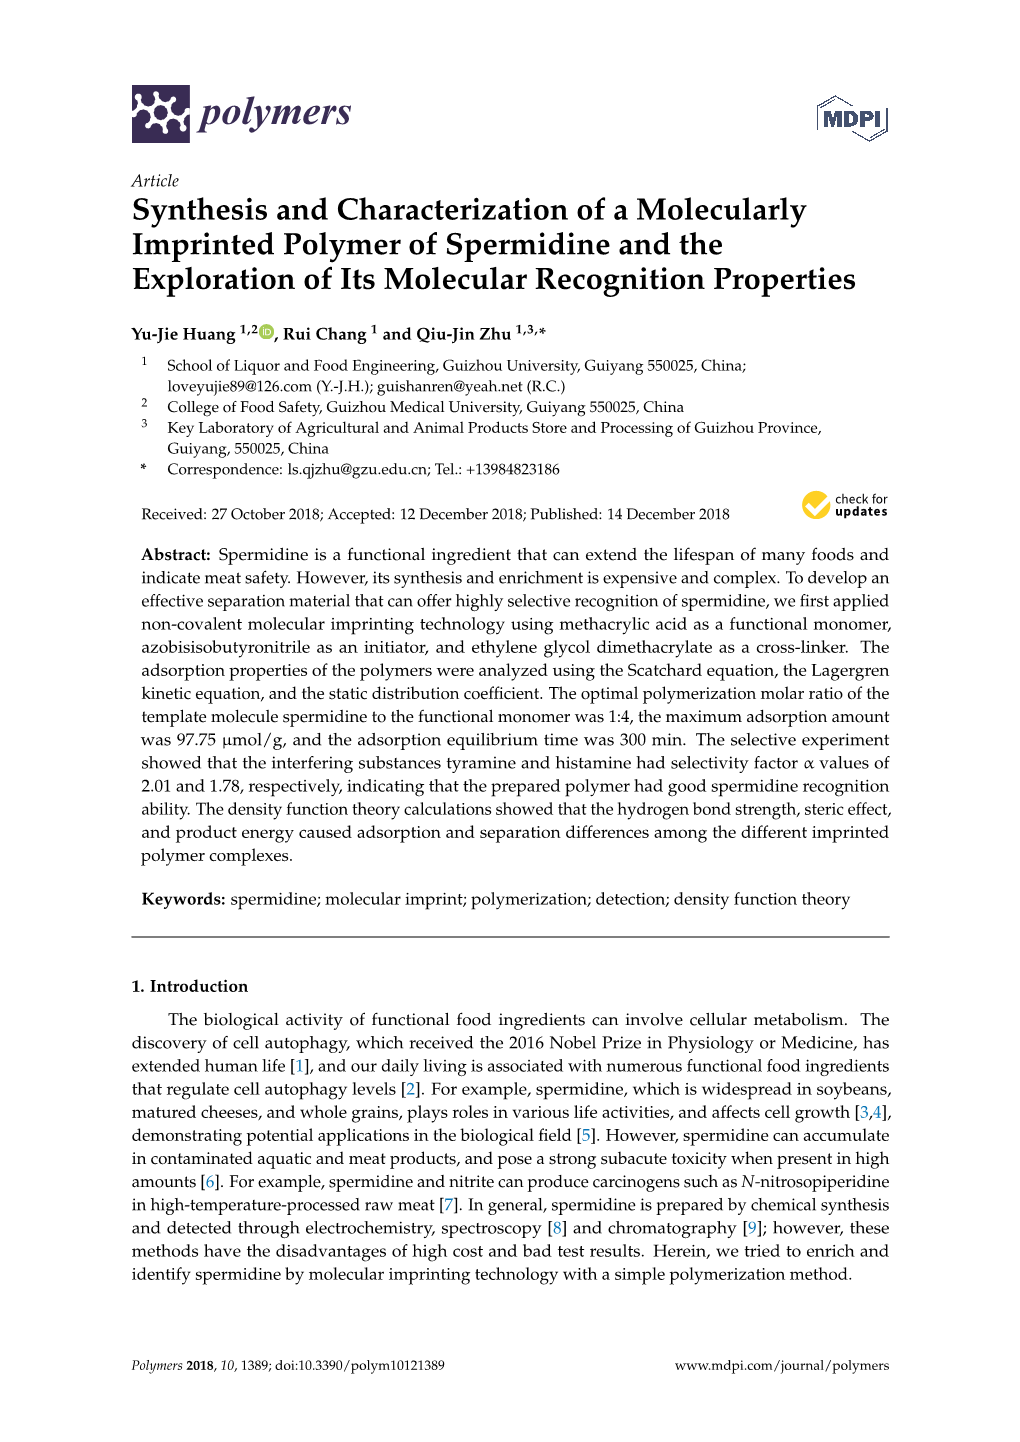 Synthesis and Characterization of a Molecularly Imprinted Polymer of Spermidine and the Exploration of Its Molecular Recognition Properties